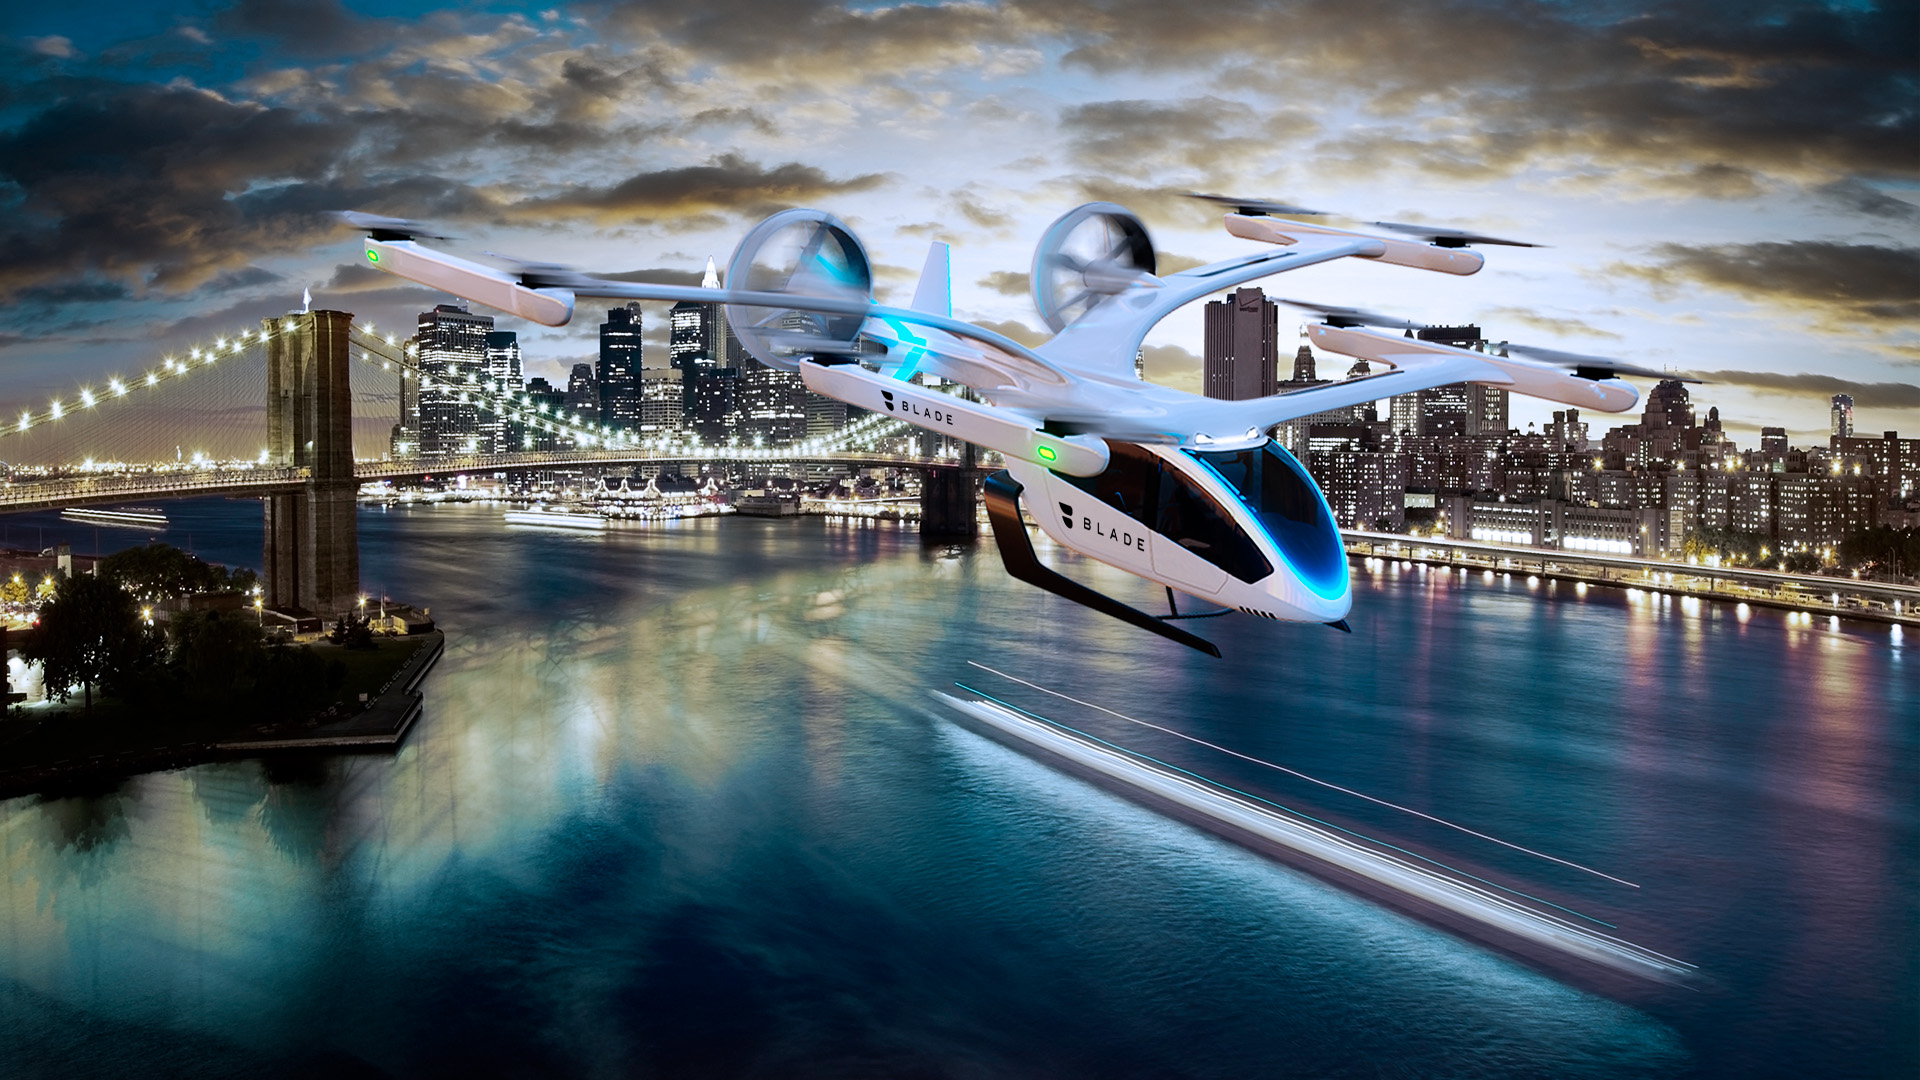 Eve to Deploy Electric Vertical Aircraft for Blade in Key Southern Florida and West Coast Markets